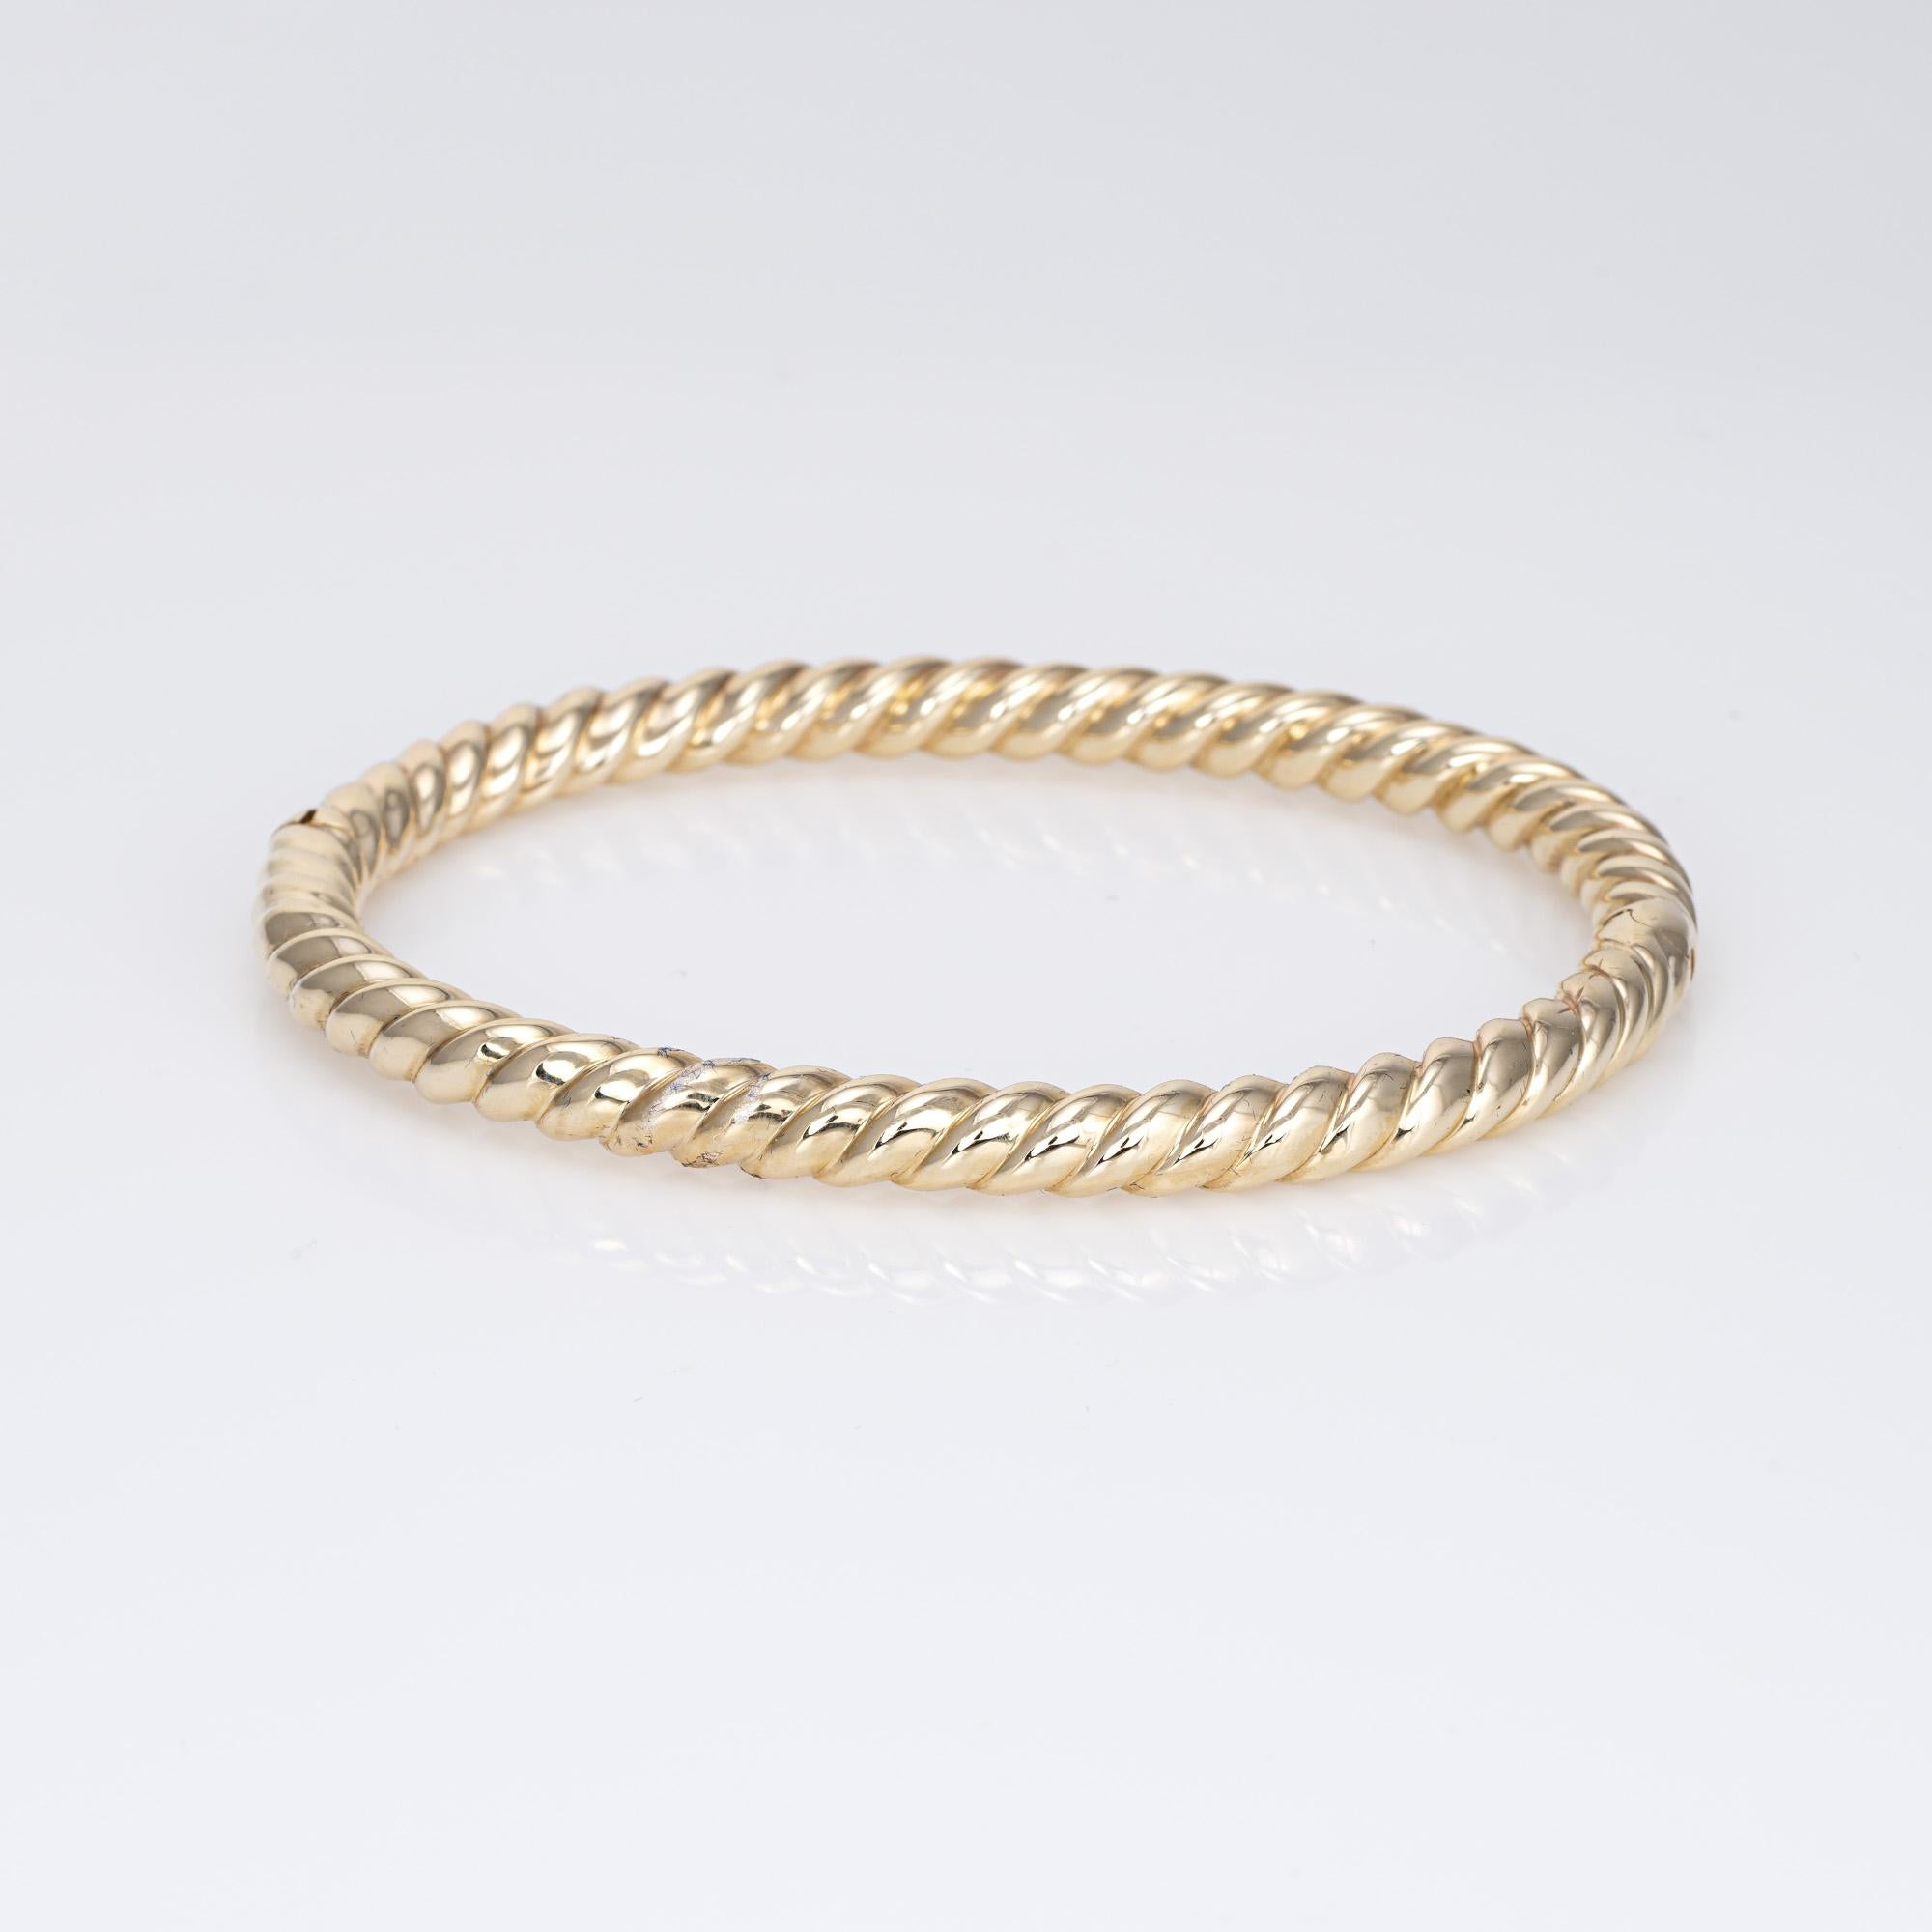 Stylish and finely detailed vintage rope twist bangle bracelet crafted in 14 karat yellow gold. 

The simple and elegant bangle bracelet features a rope twist design. The bracelet is great worn alone or layered with your fine jewelry from any era.  